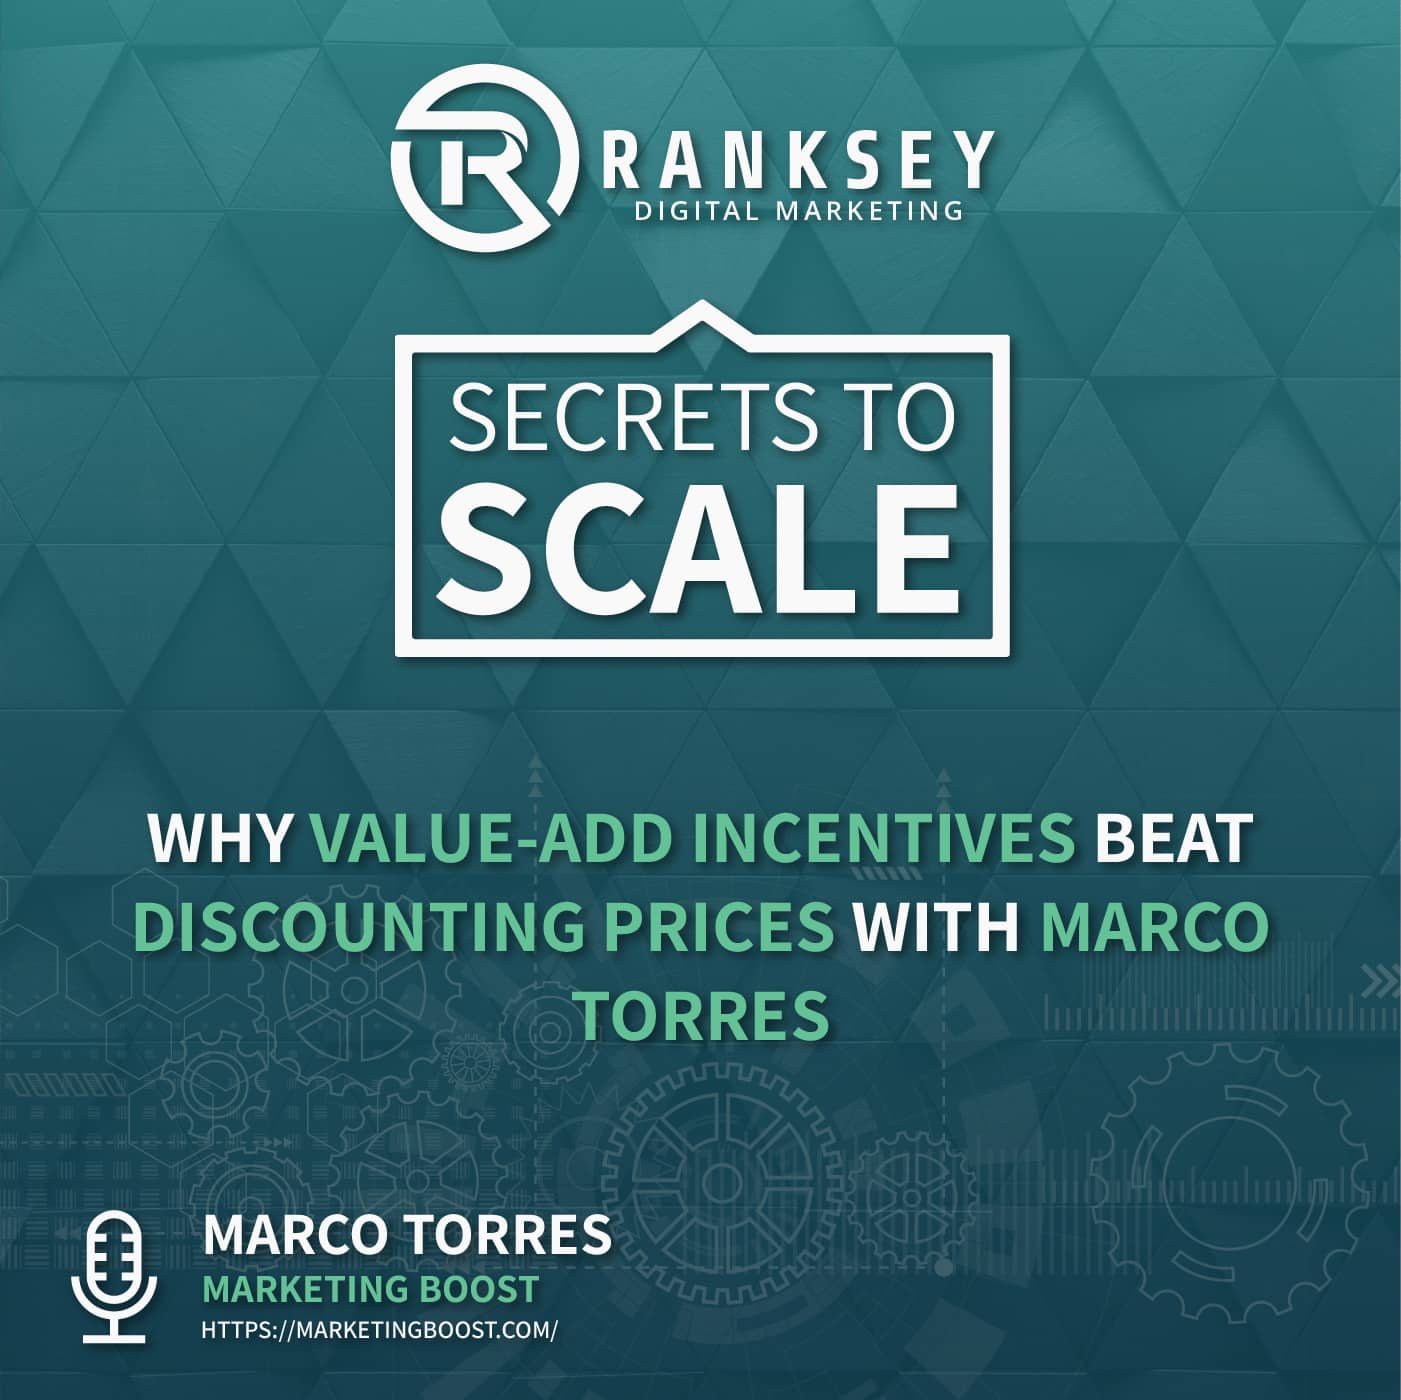 080 - Why Value-Add Incentives Beat Discounting Prices With Marco Torres